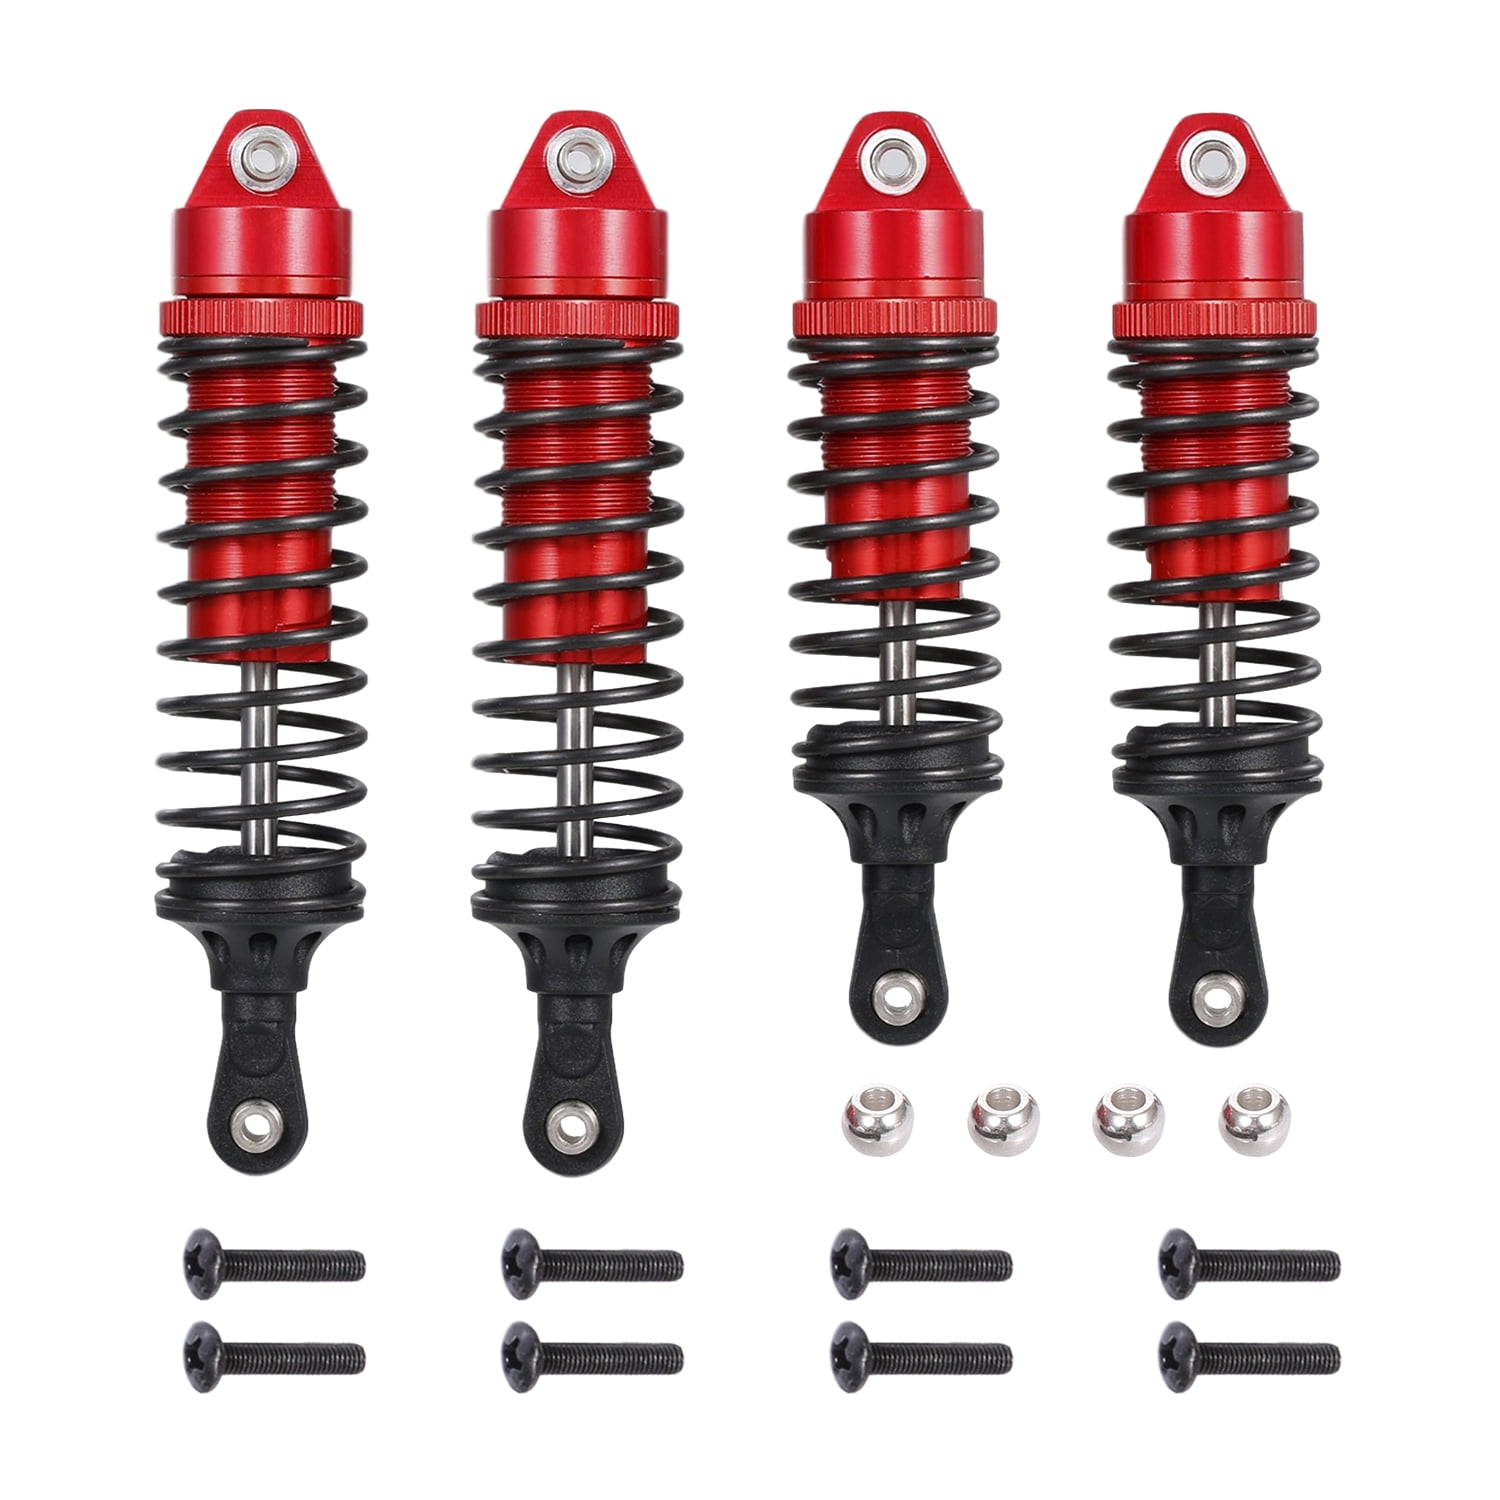 2PCS Metal Front Rear Shock Absorbers Set for Traxxas 1/10 Slash 4x4 4WD RC Cars